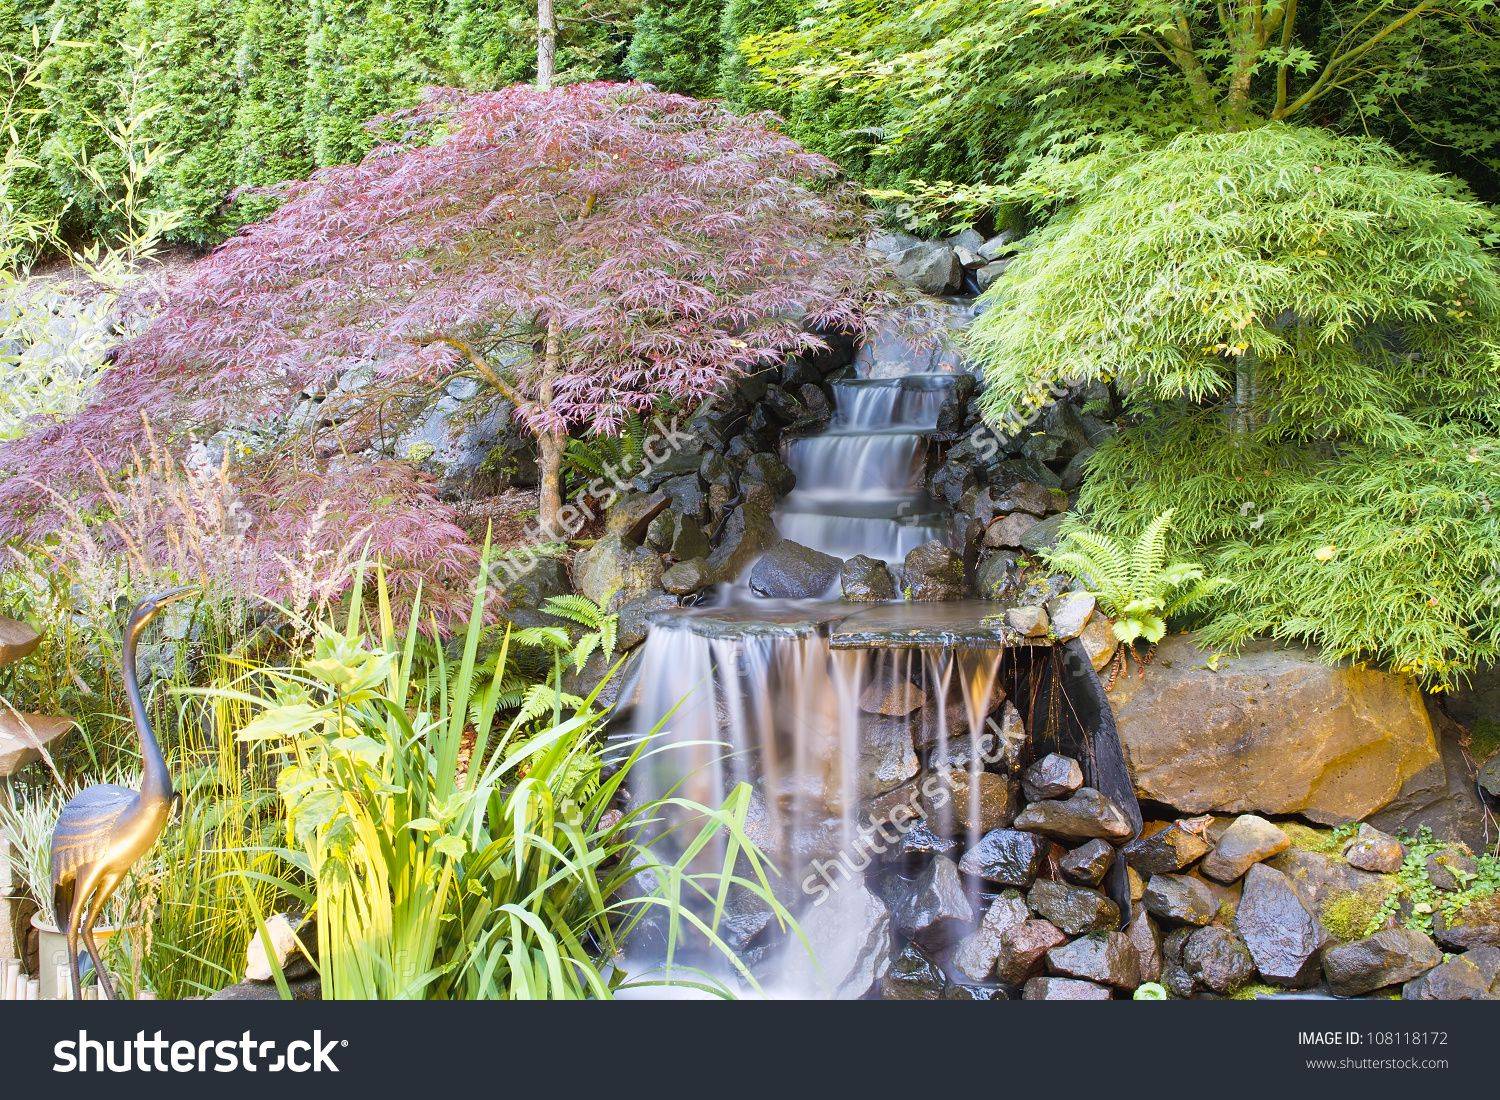 All About Japanese Maples